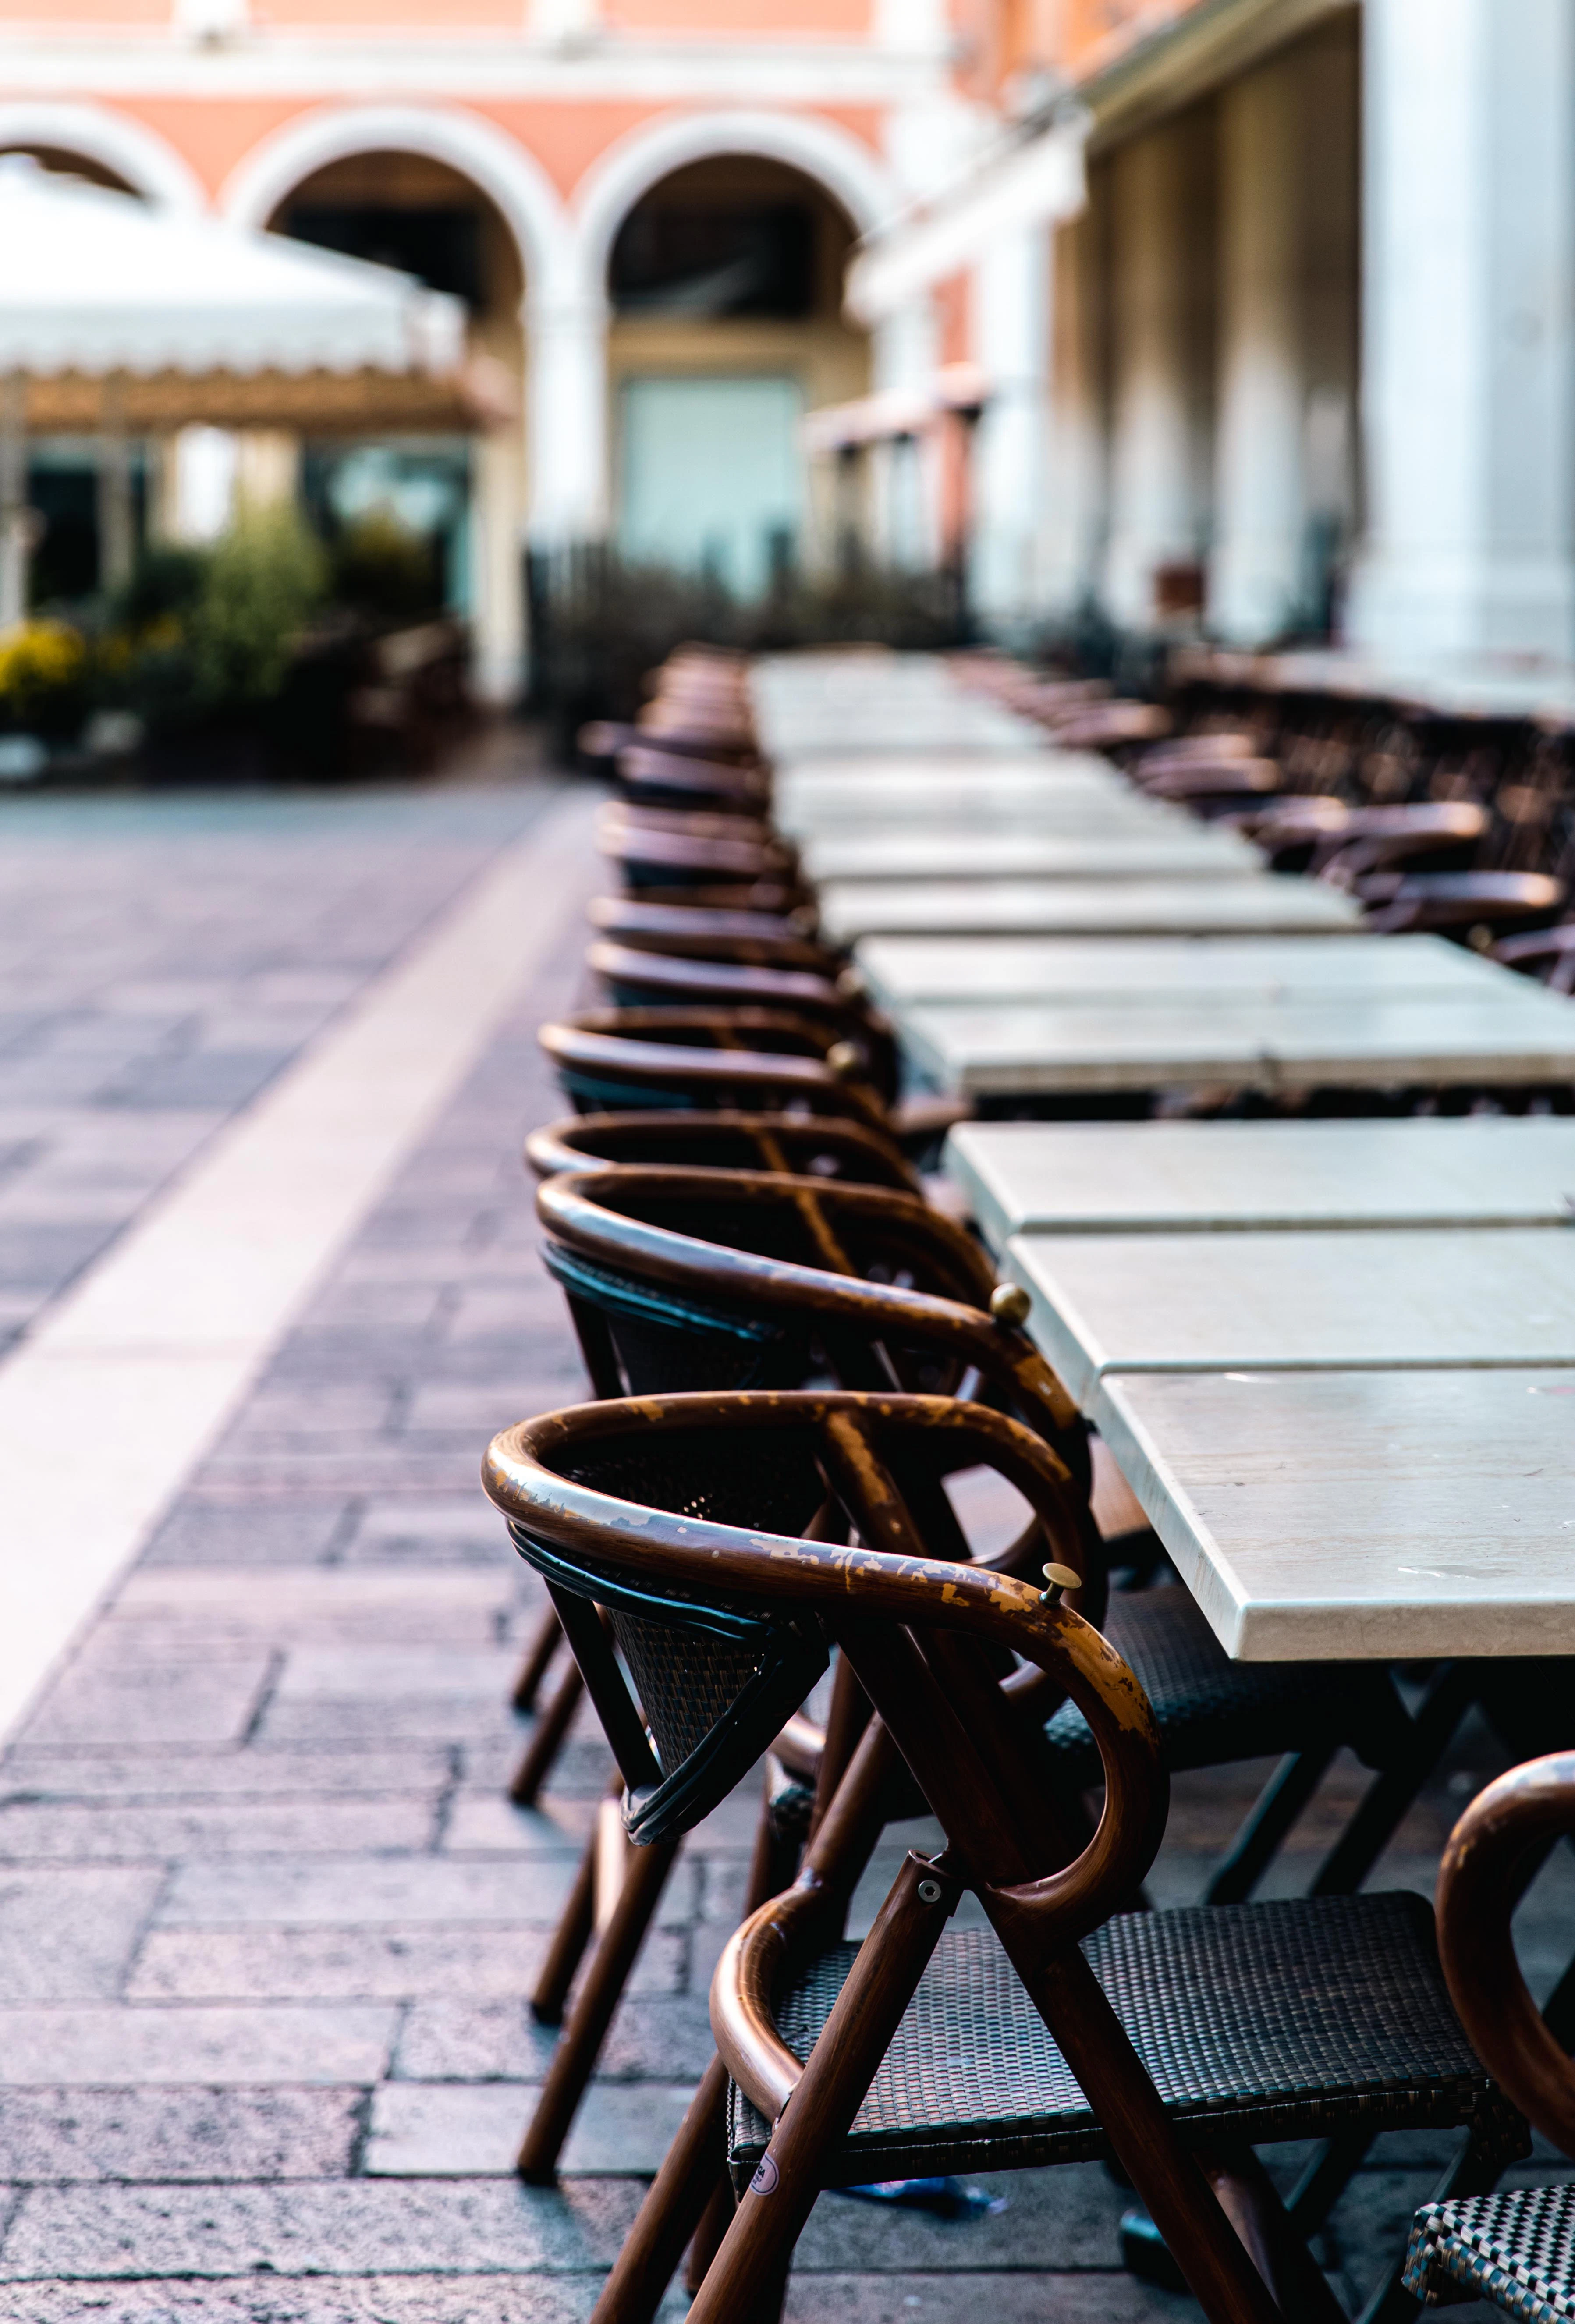 A line of empty tables and chairs in a piazza.